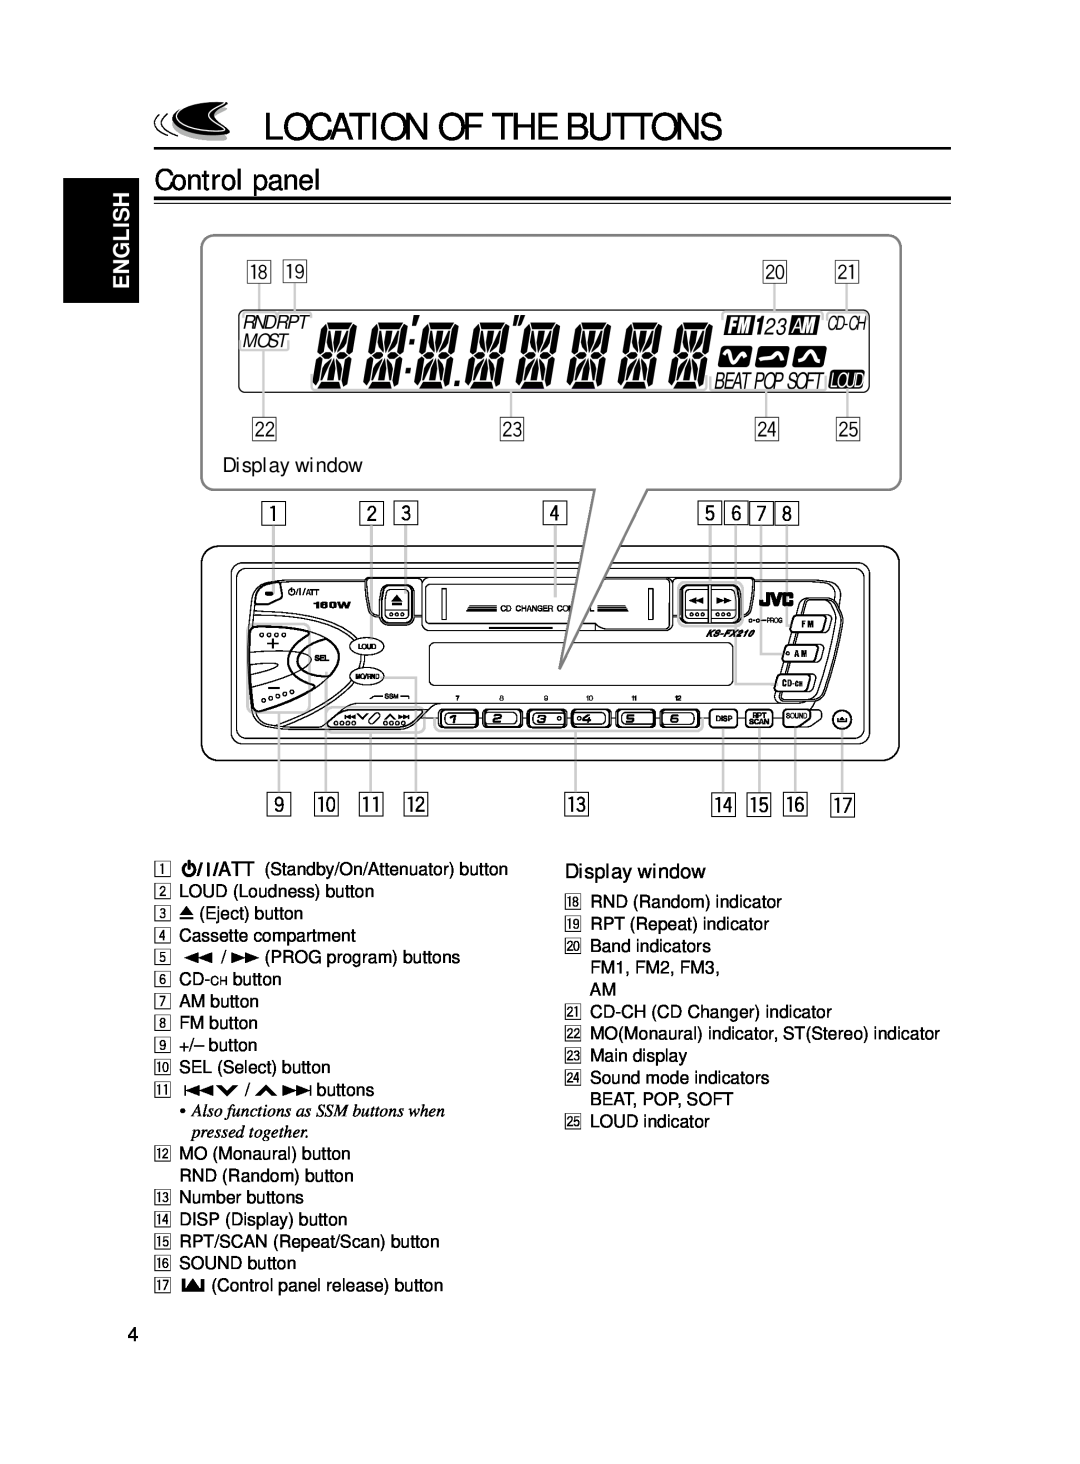 JVC KS-FX210 manual Location Of The Buttons, Control panel 